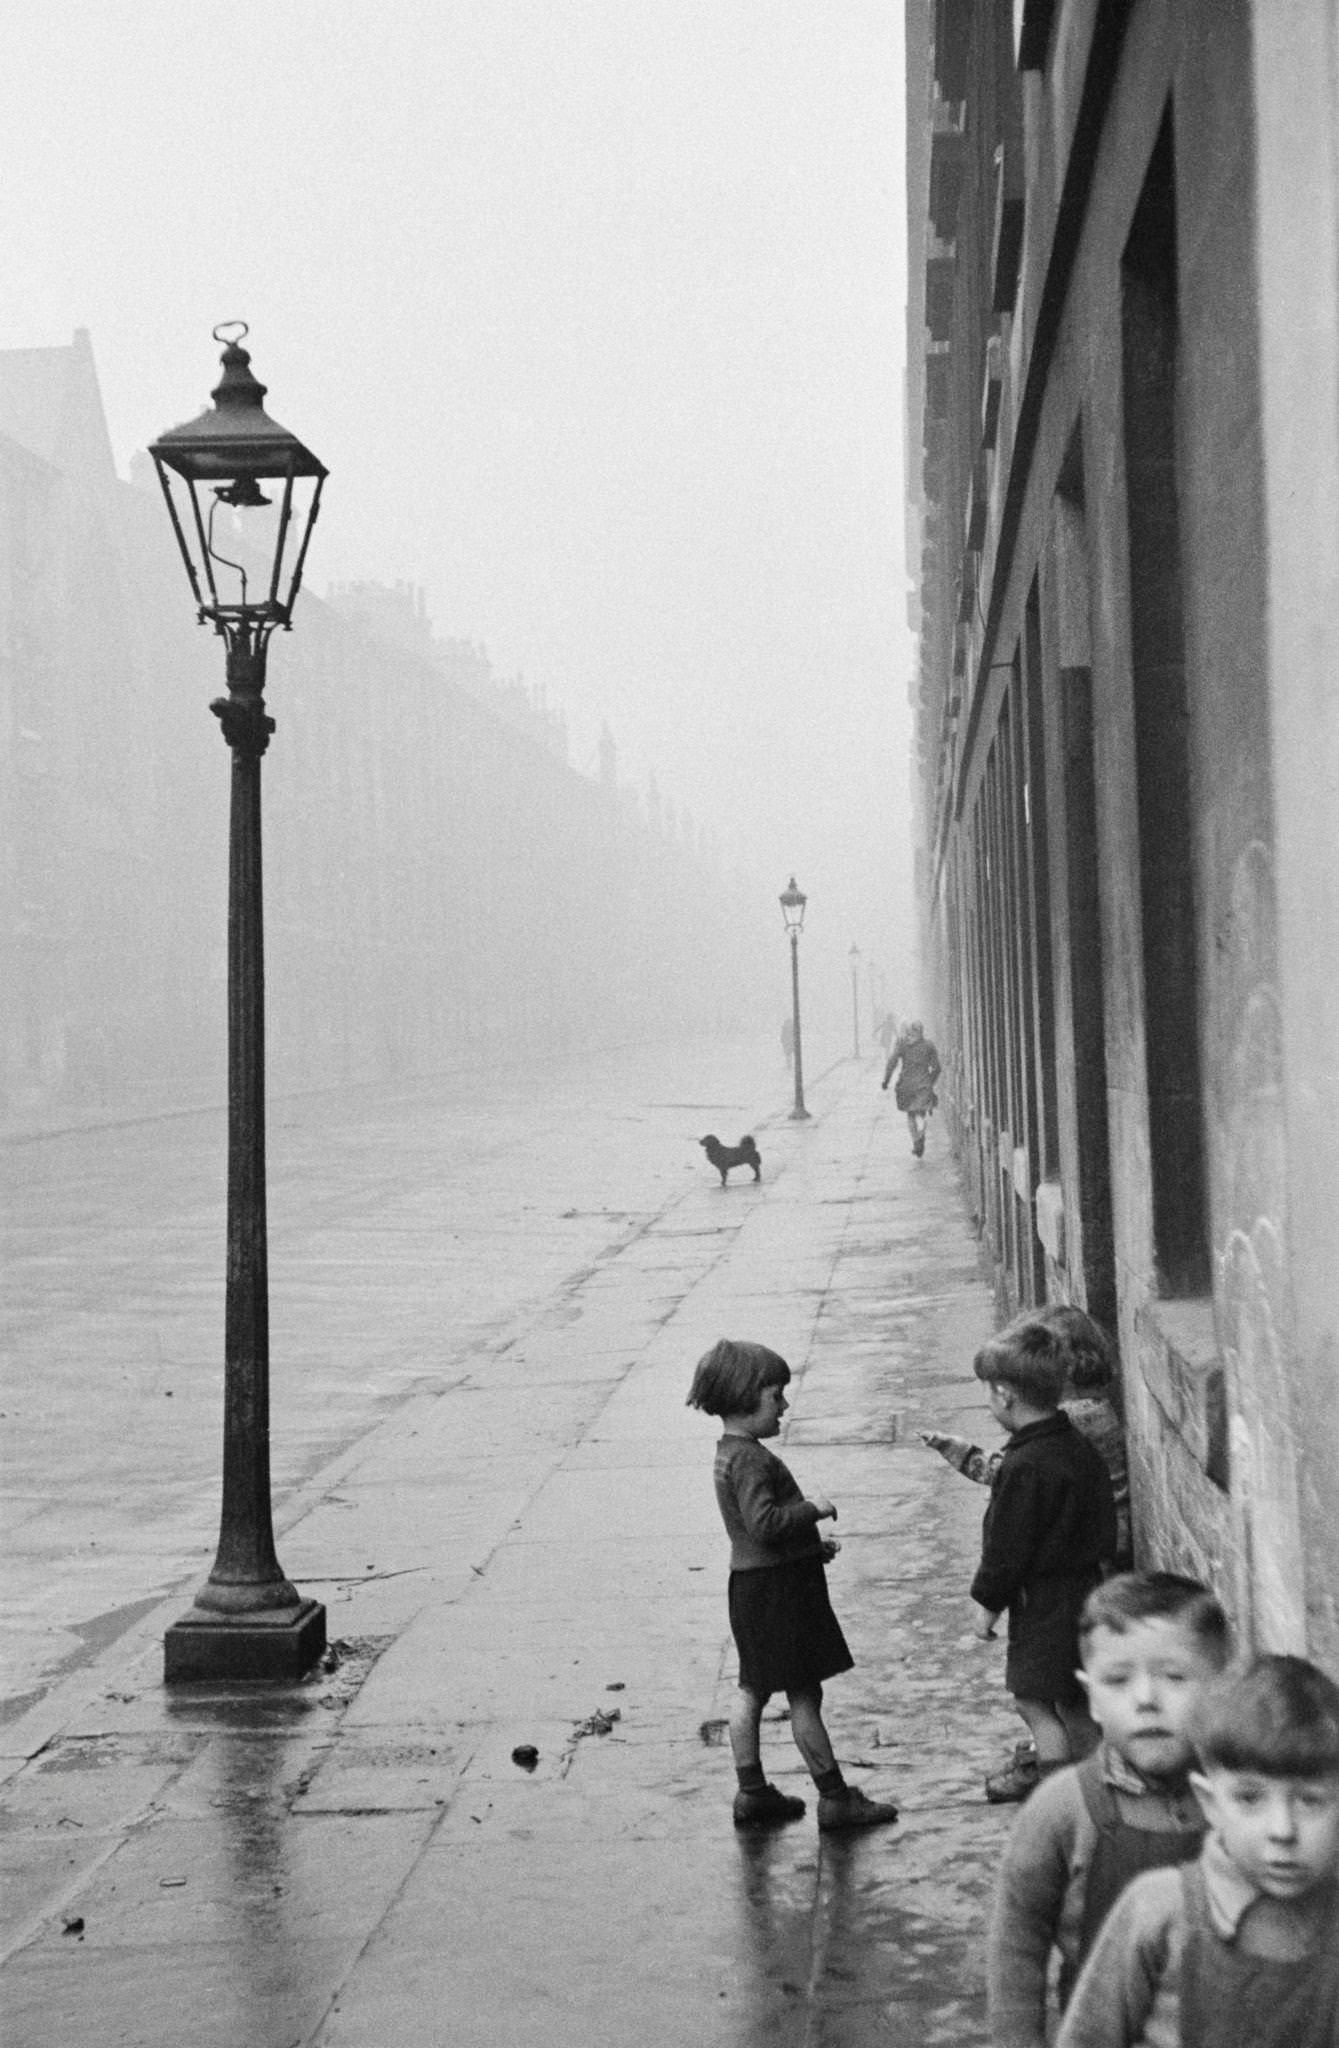 A group of young children on a street in the Gorbals, a slum district of Glasgow, 1948.